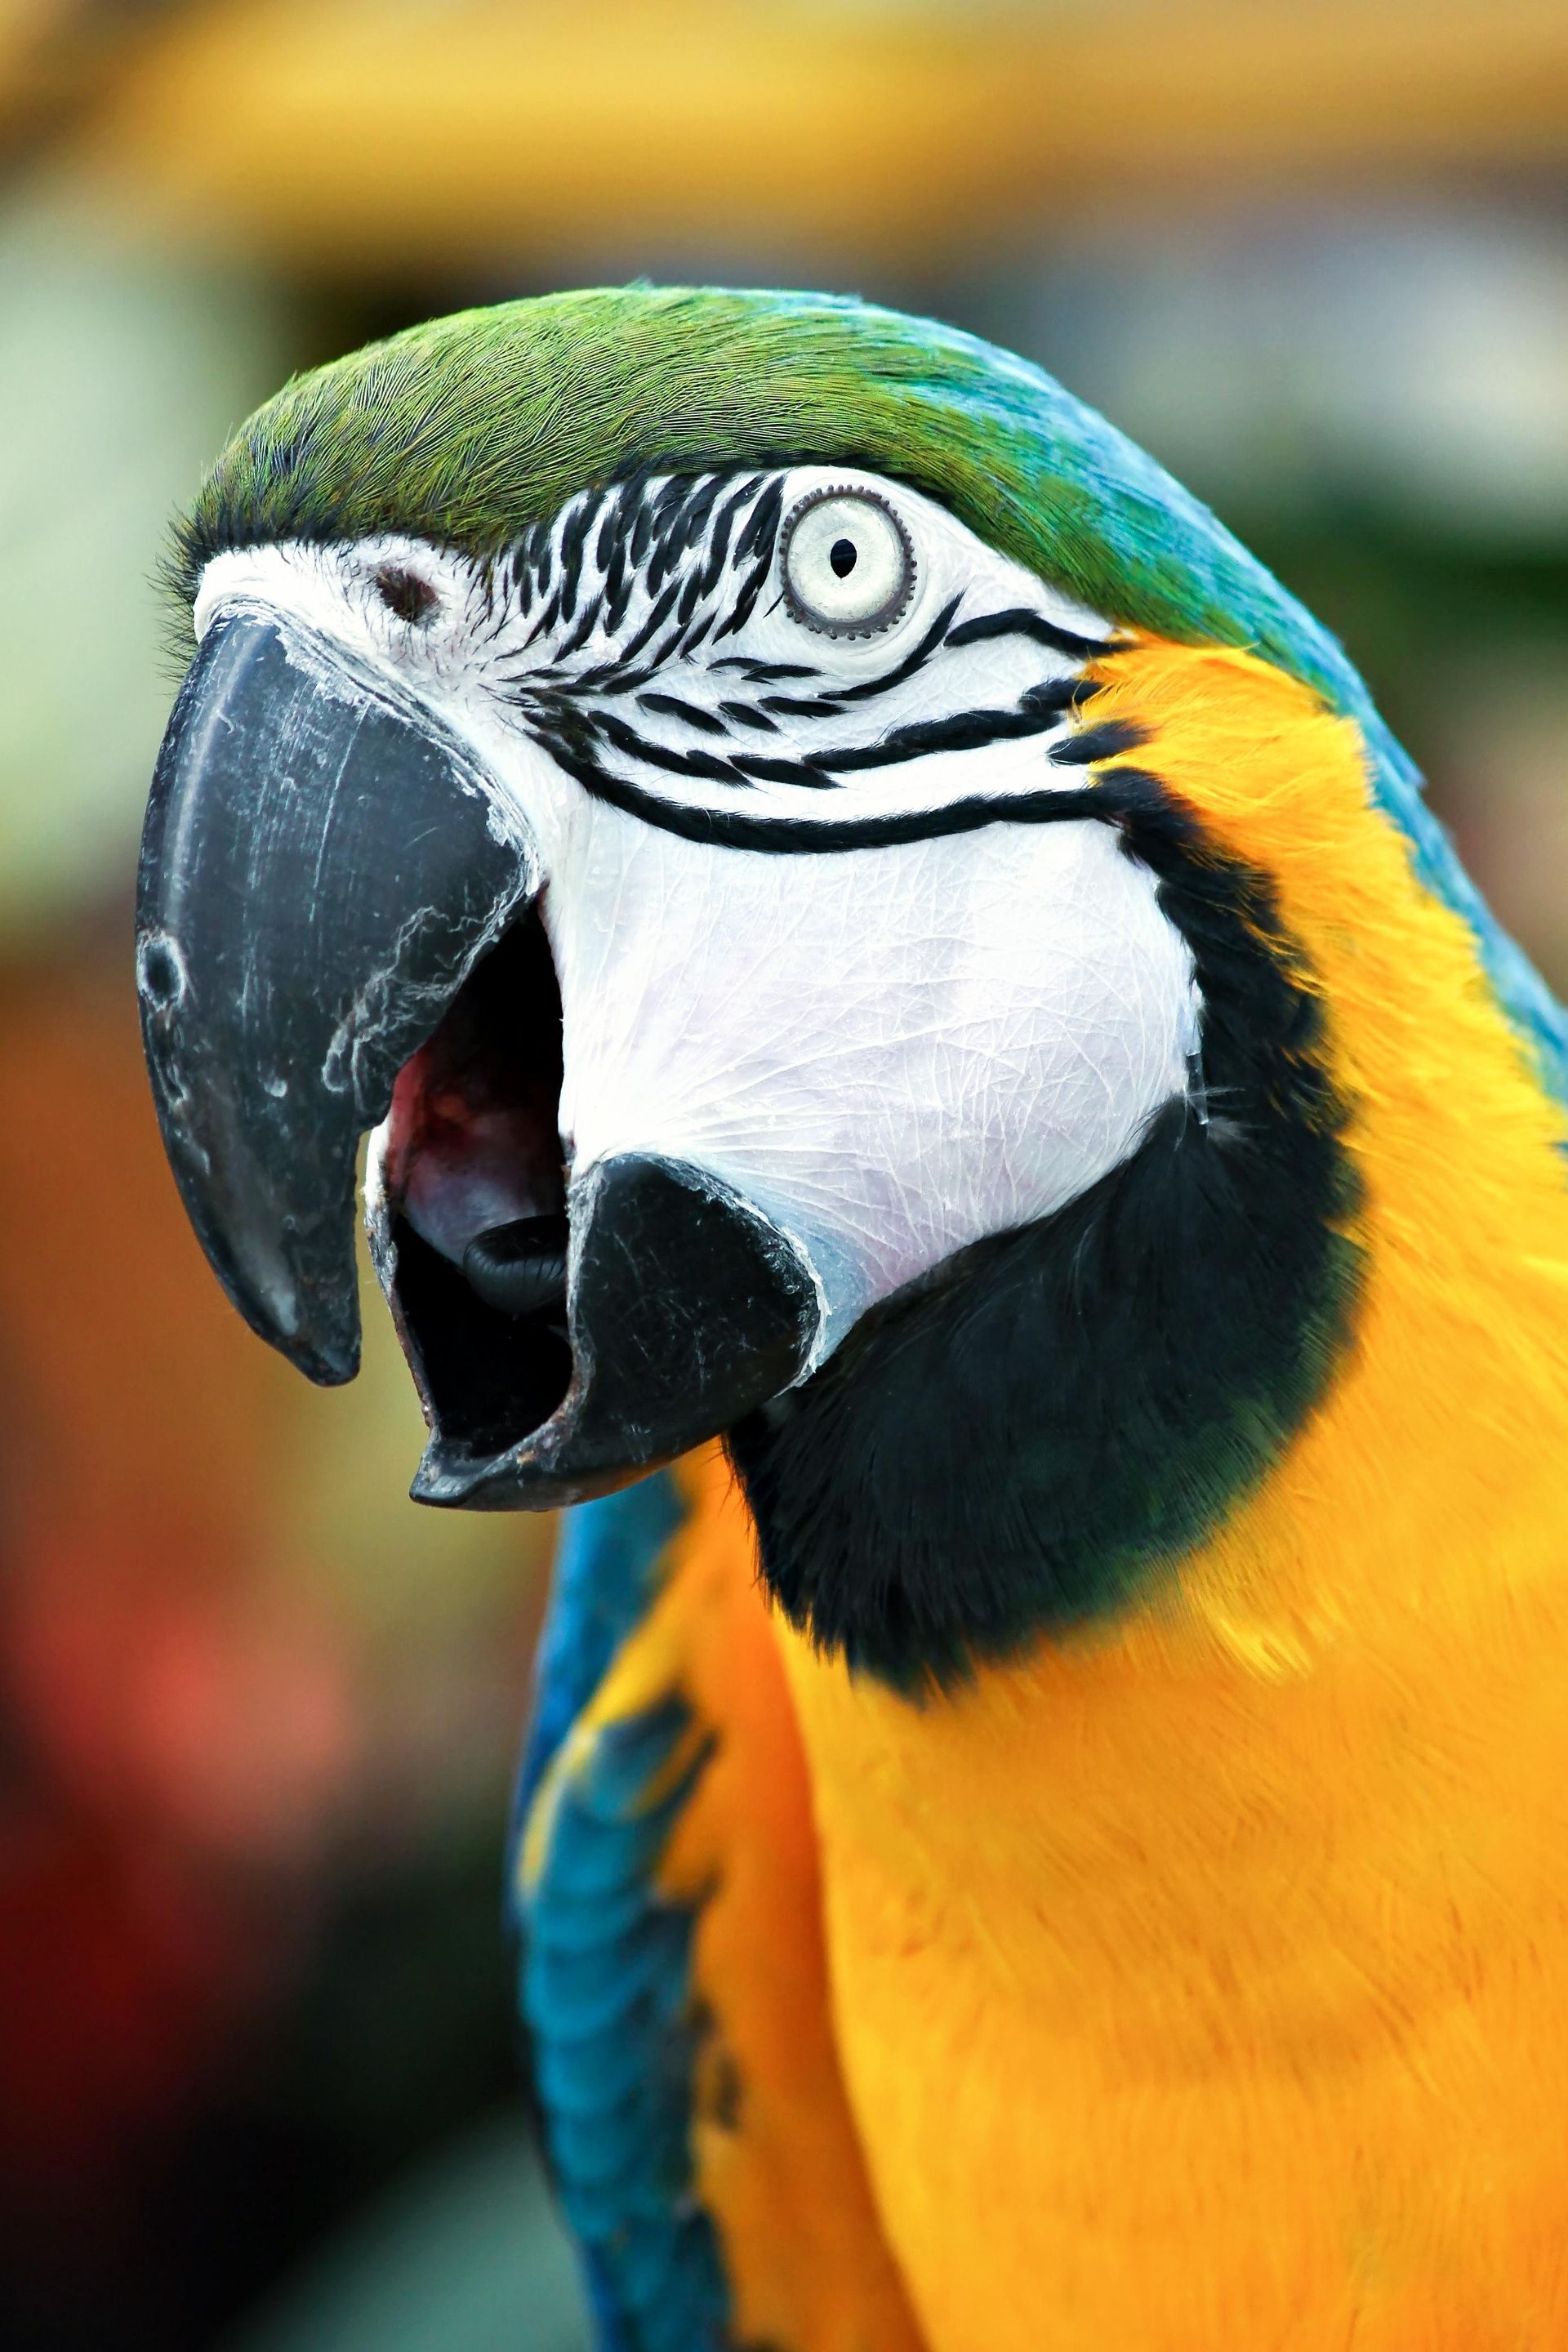 A macaw parrot with its beak open.